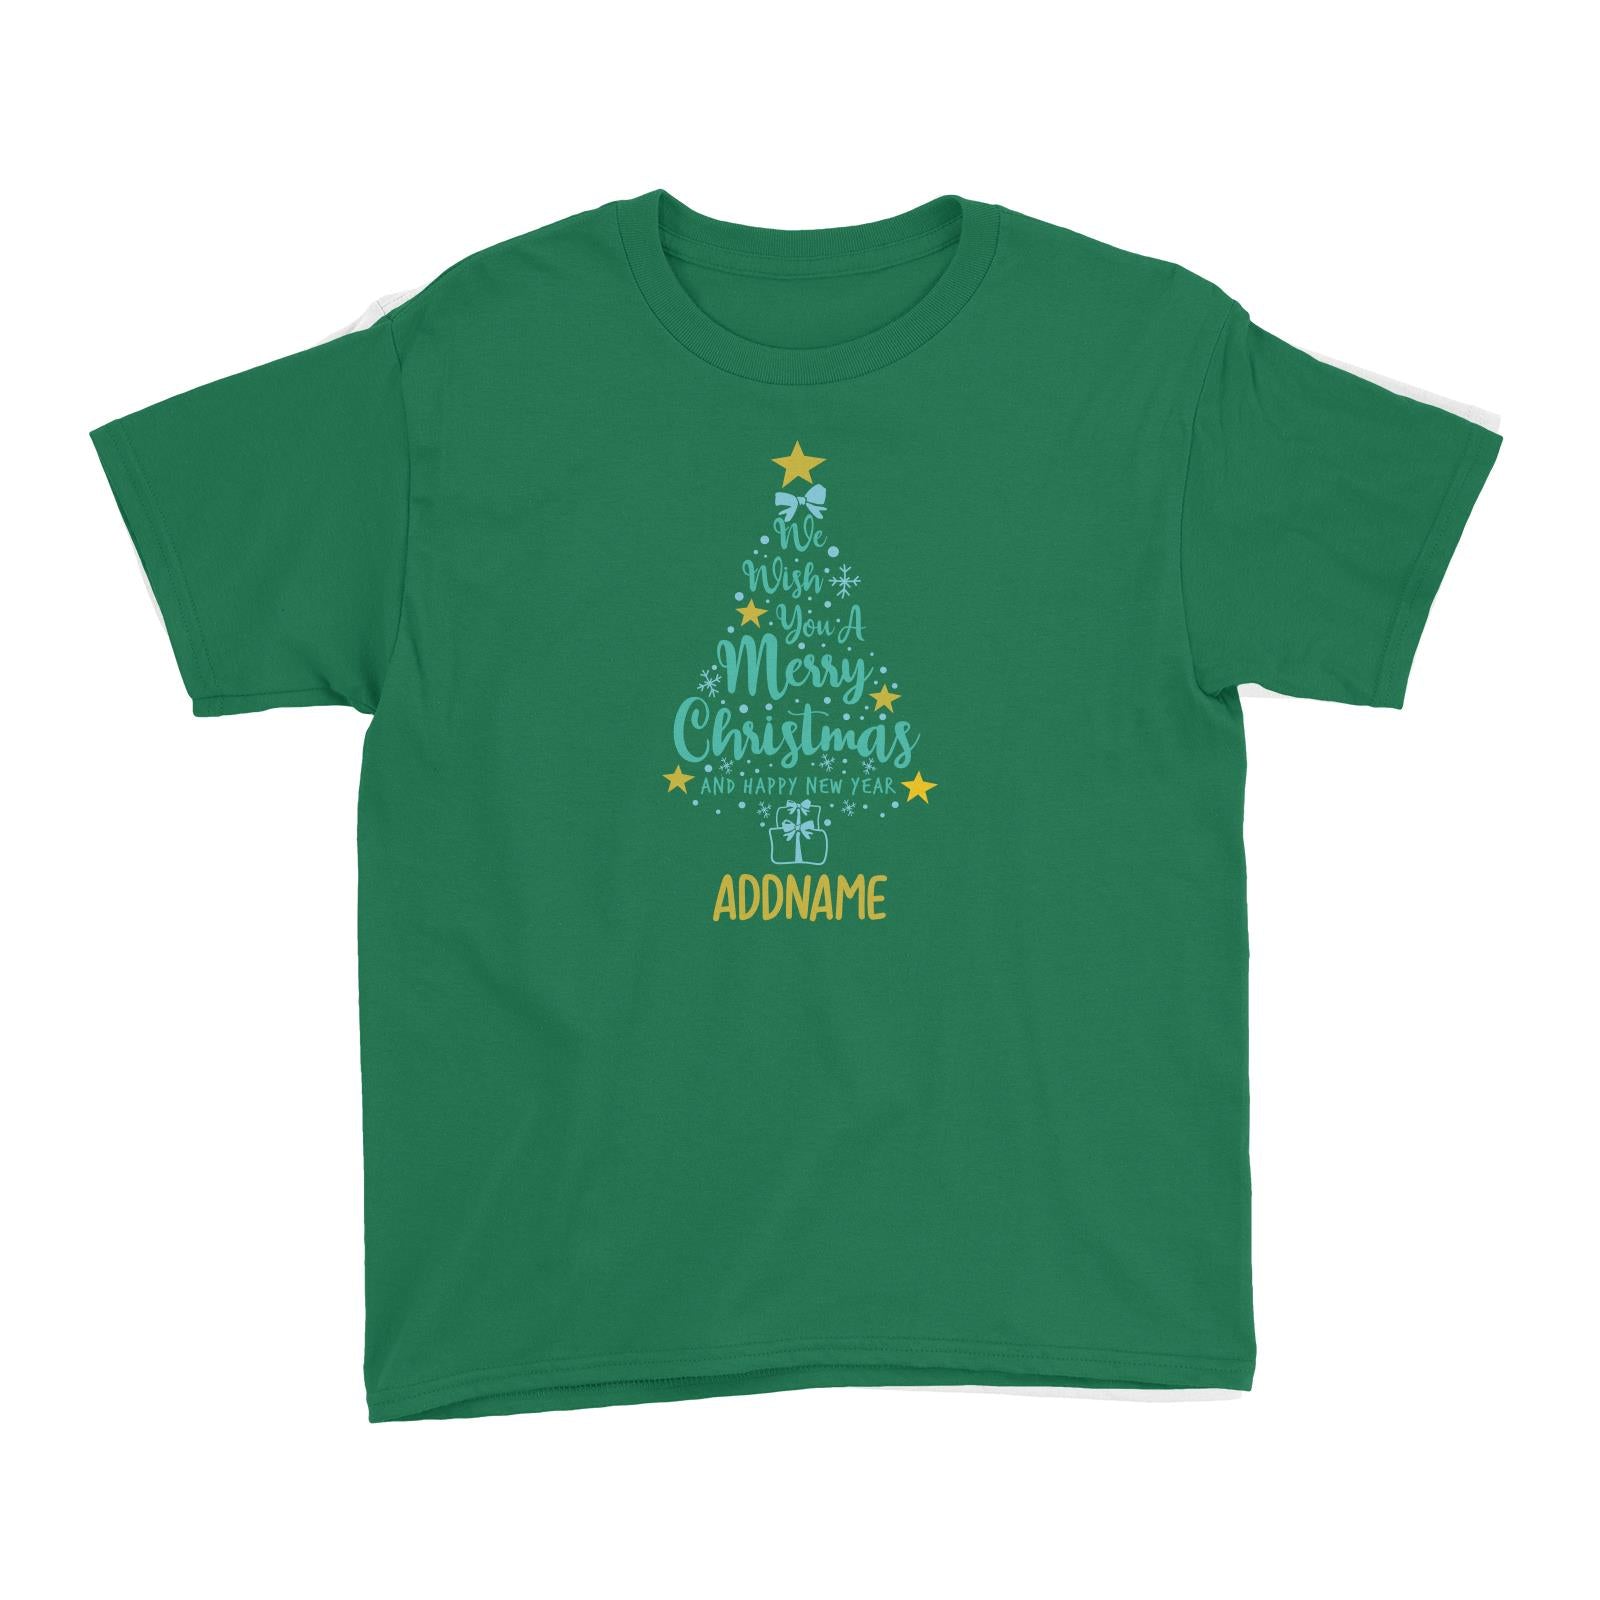 Xmas We Wish You A Merry Christmas and A Happy New Year Kid's T-Shirt